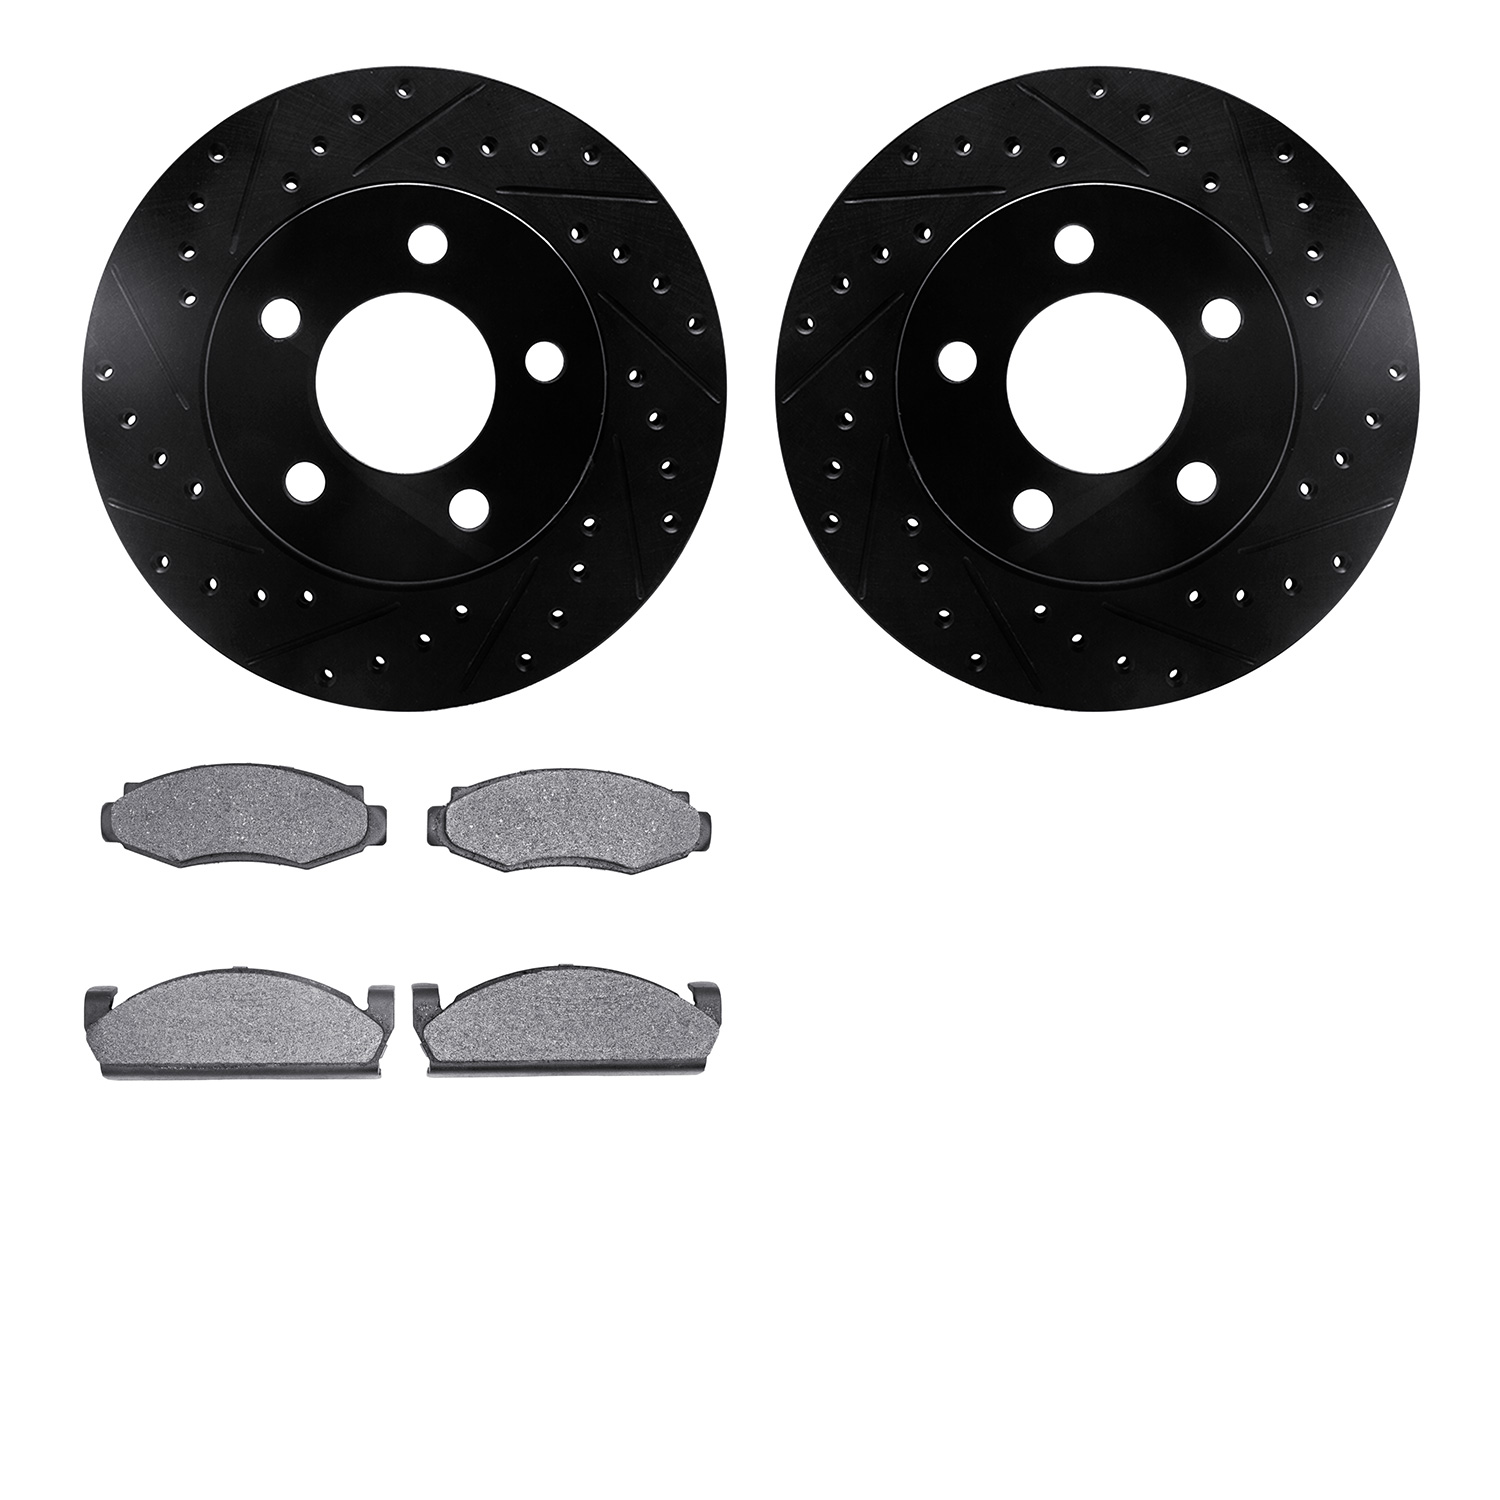 8402-42016 Drilled/Slotted Brake Rotors with Ultimate-Duty Brake Pads Kit [Black], 1980-1981 GM, Position: Front